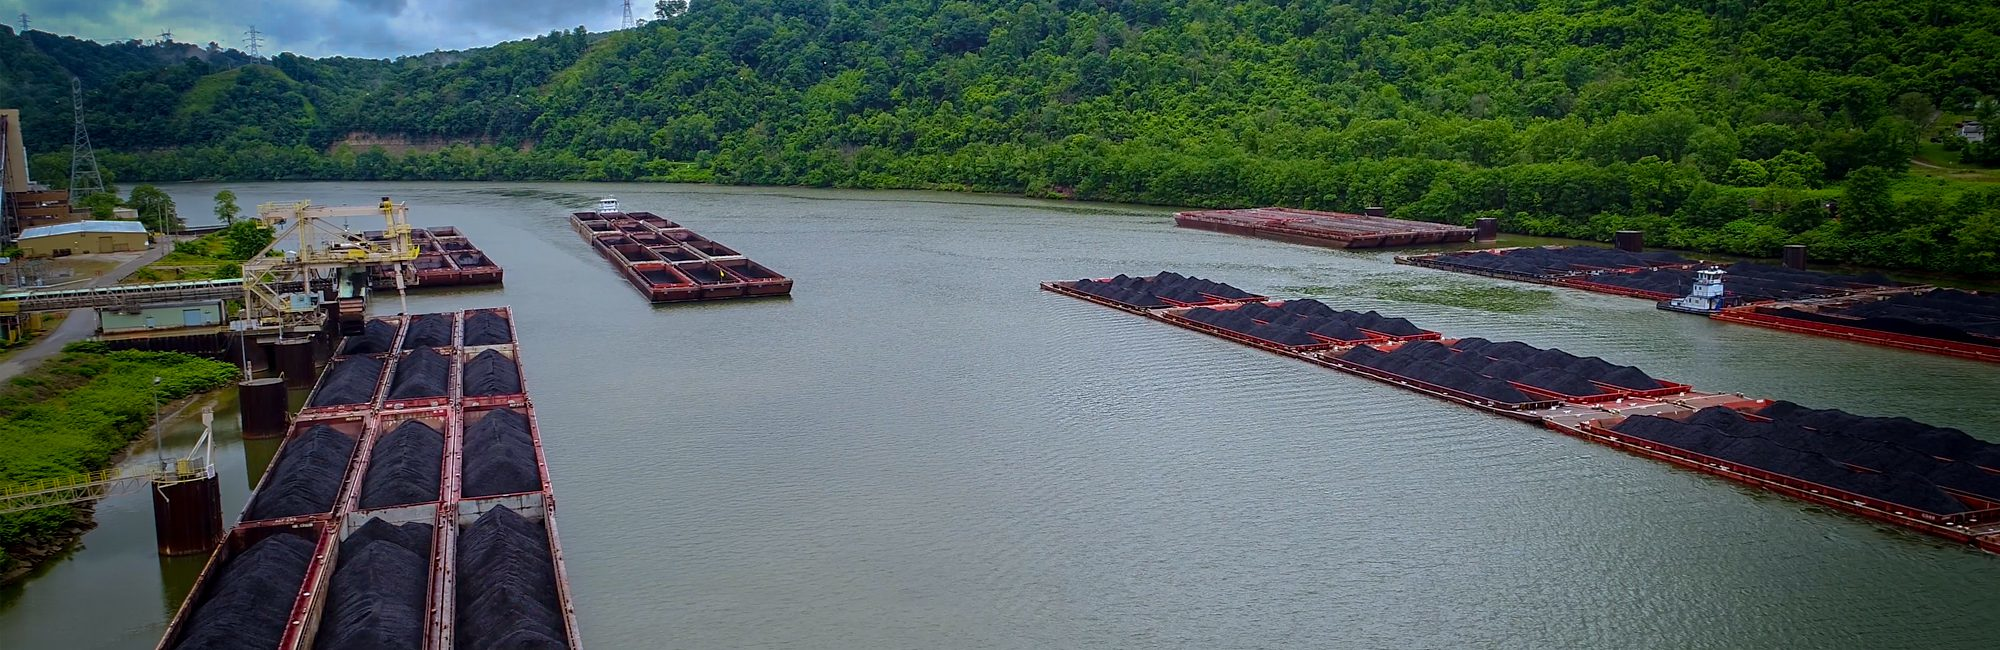 Loaded barges on the river